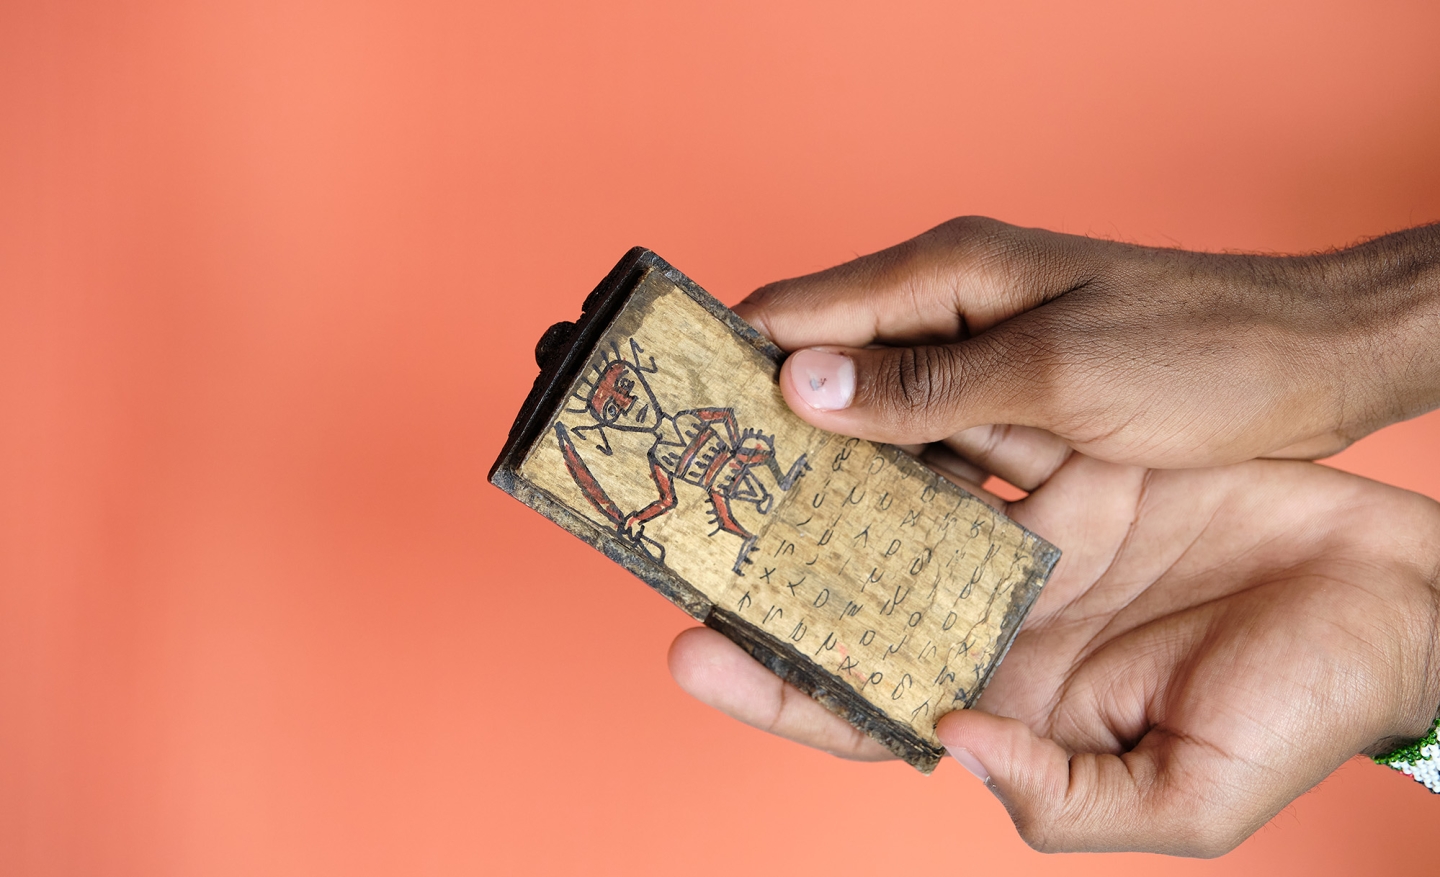 Student holds tiny book